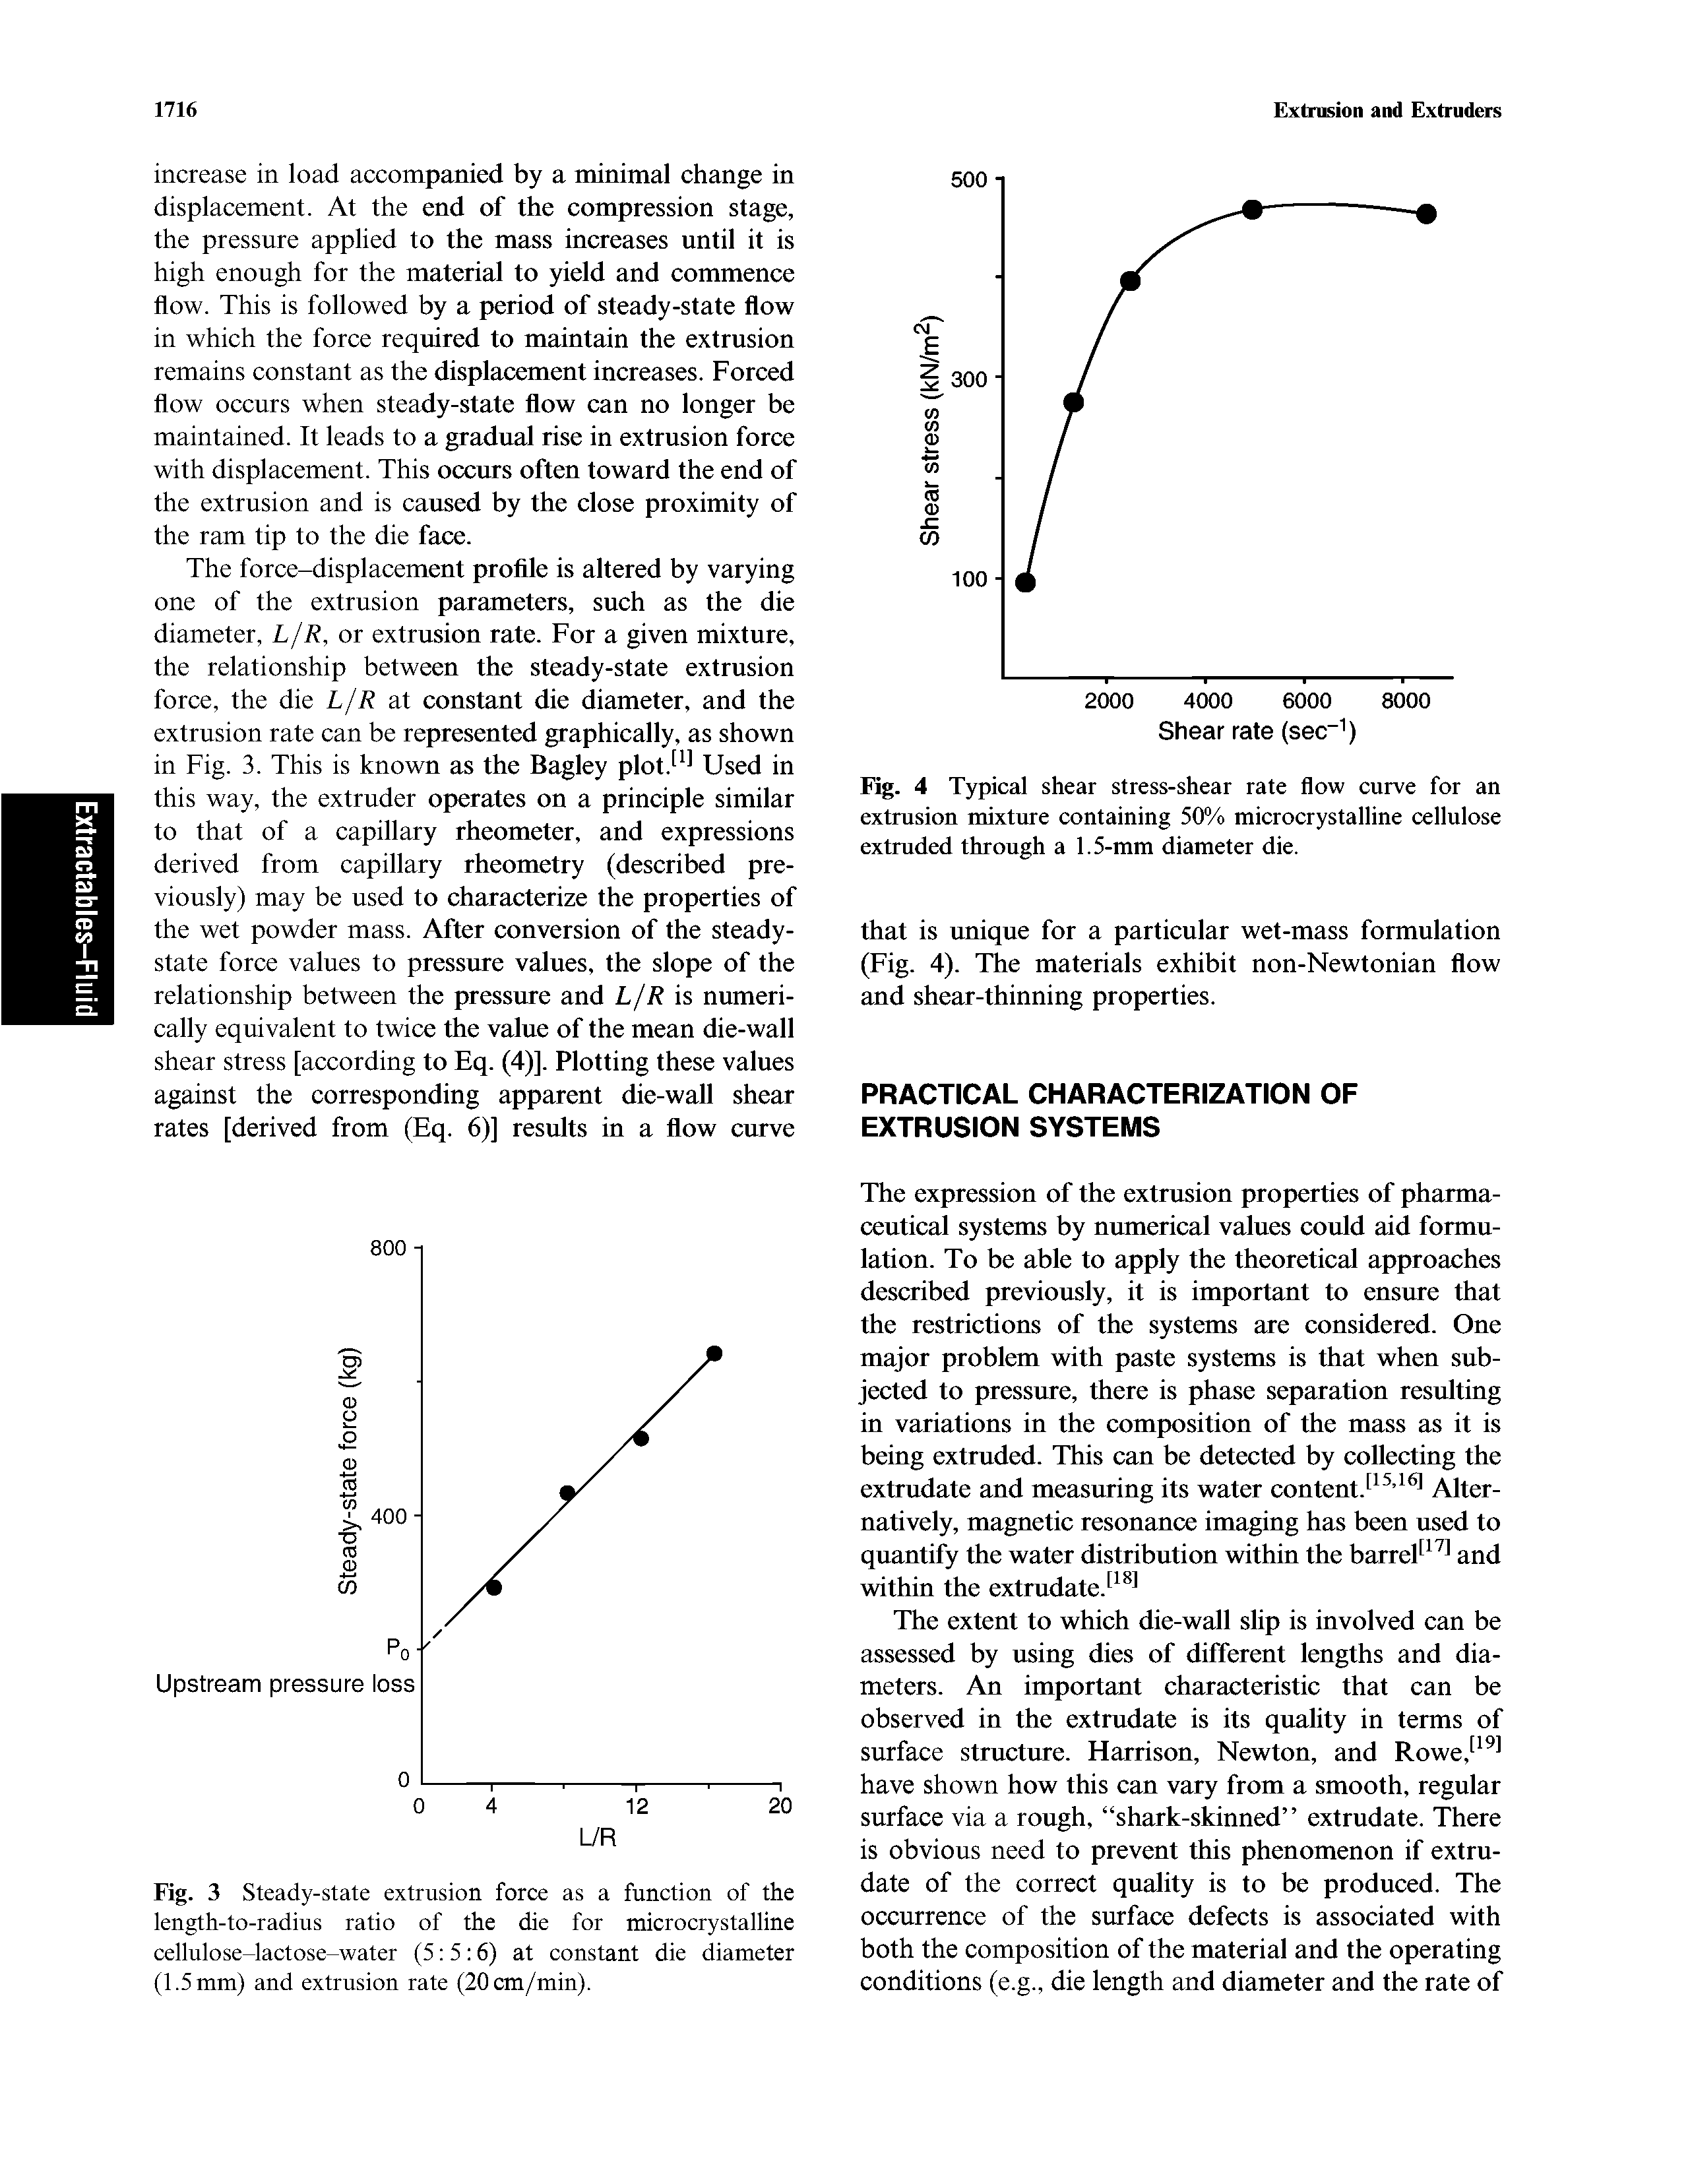 Fig. 3 Steady-state extrusion force as a function of the length-to-radius ratio of the die for microcrystalline cellulose-lactose-water (5 5 6) at constant die diameter (1.5 mm) and extrusion rate (20cm/min).